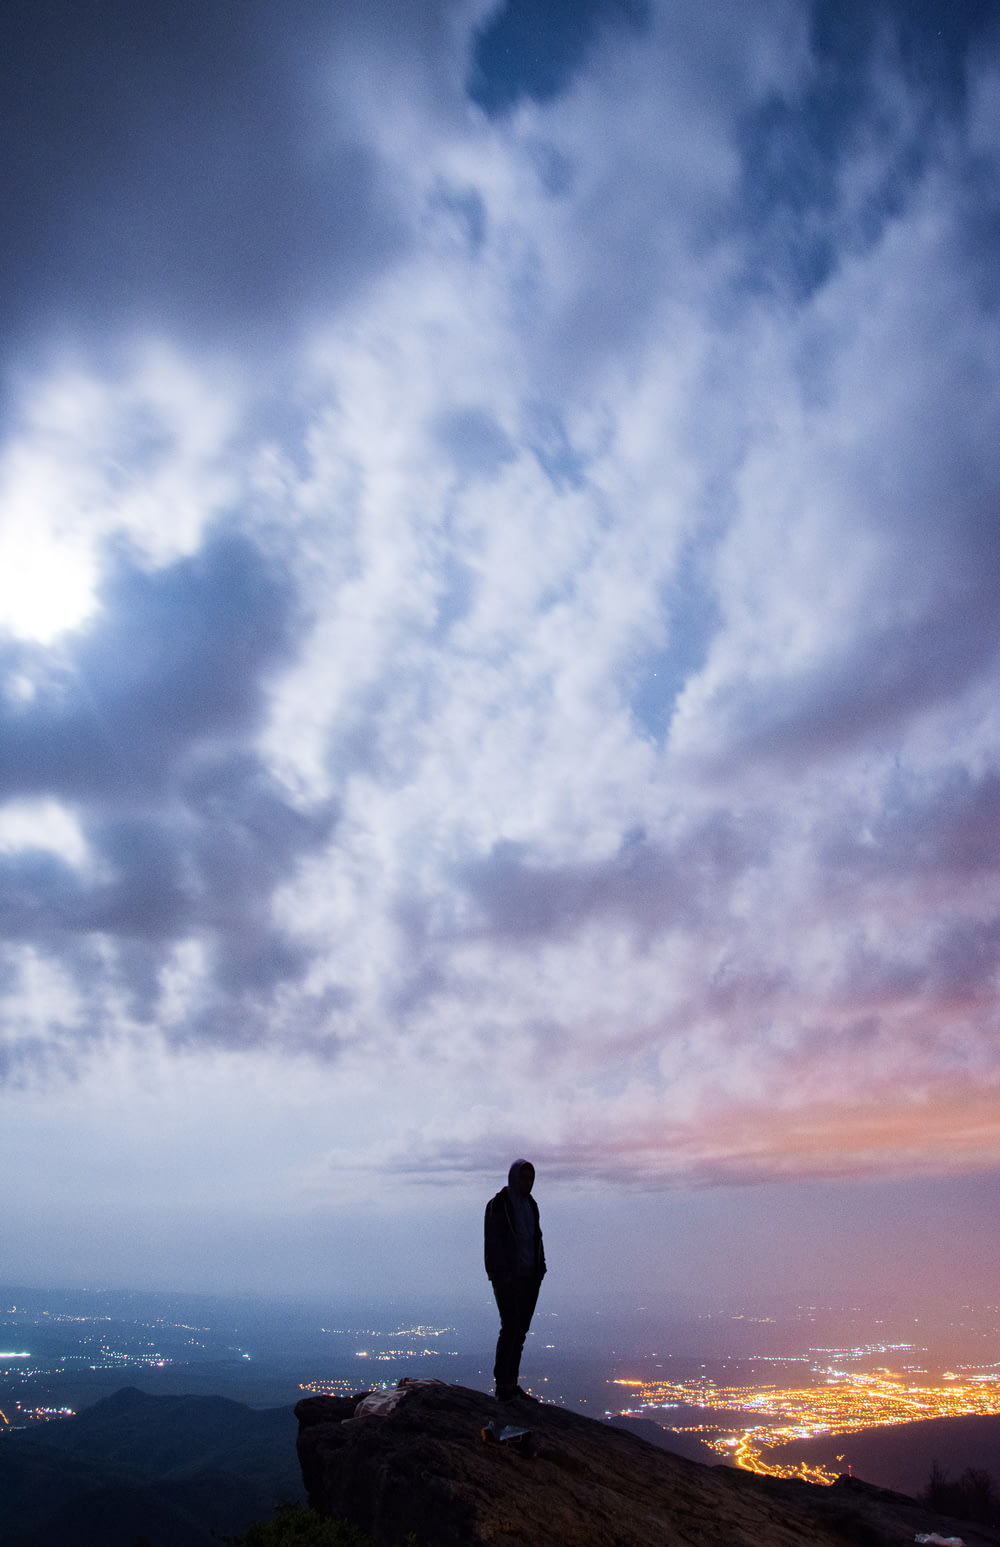 man standing on cliff with cityscape view under cloudy sky